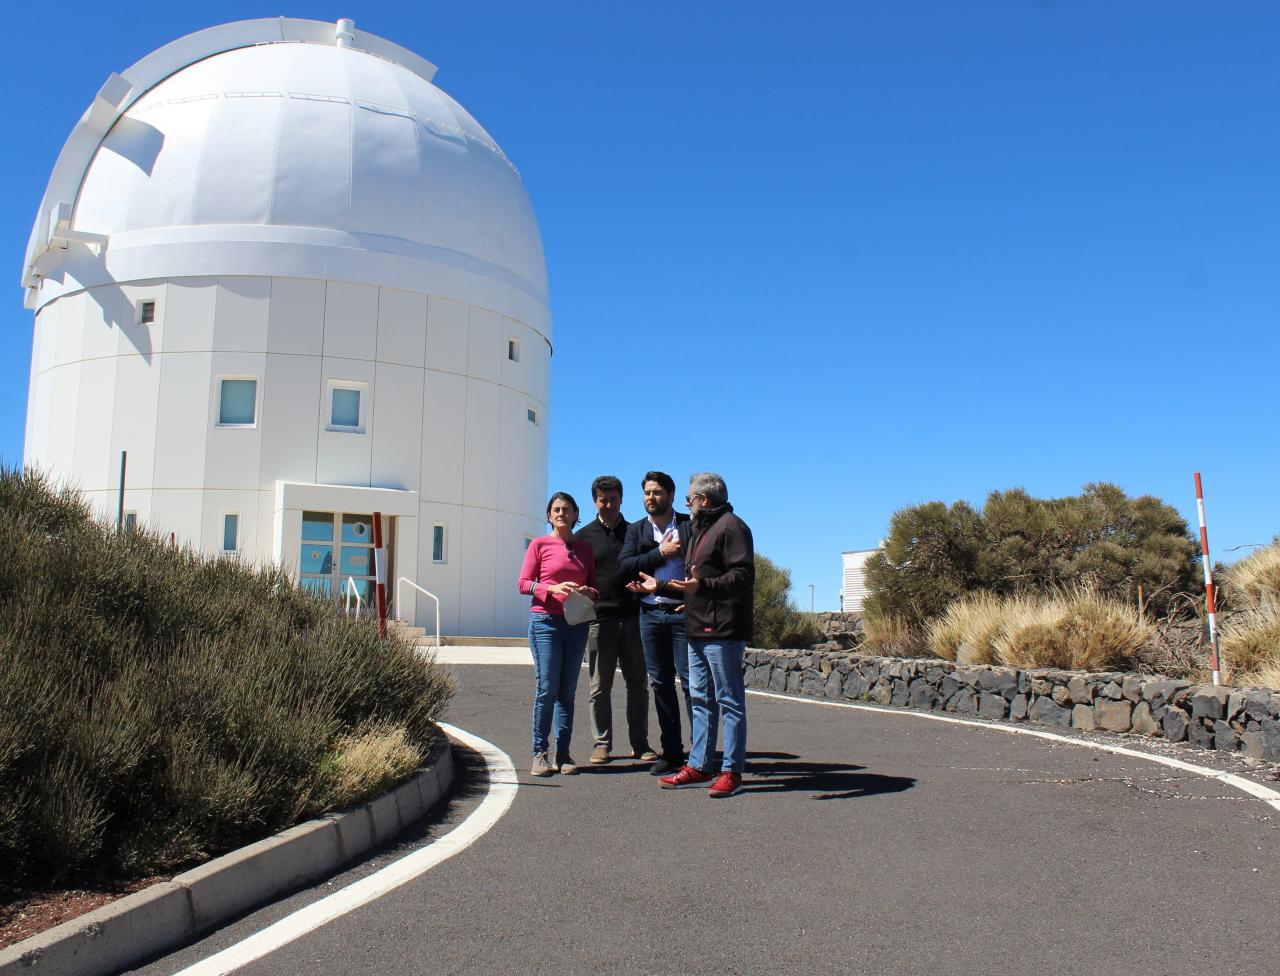 The deputy director of the IAC, the head of Economic and Legal Affairs of IACTEC, the mayor of Güímar and the manager of the Teide Observatory in front of the OGS